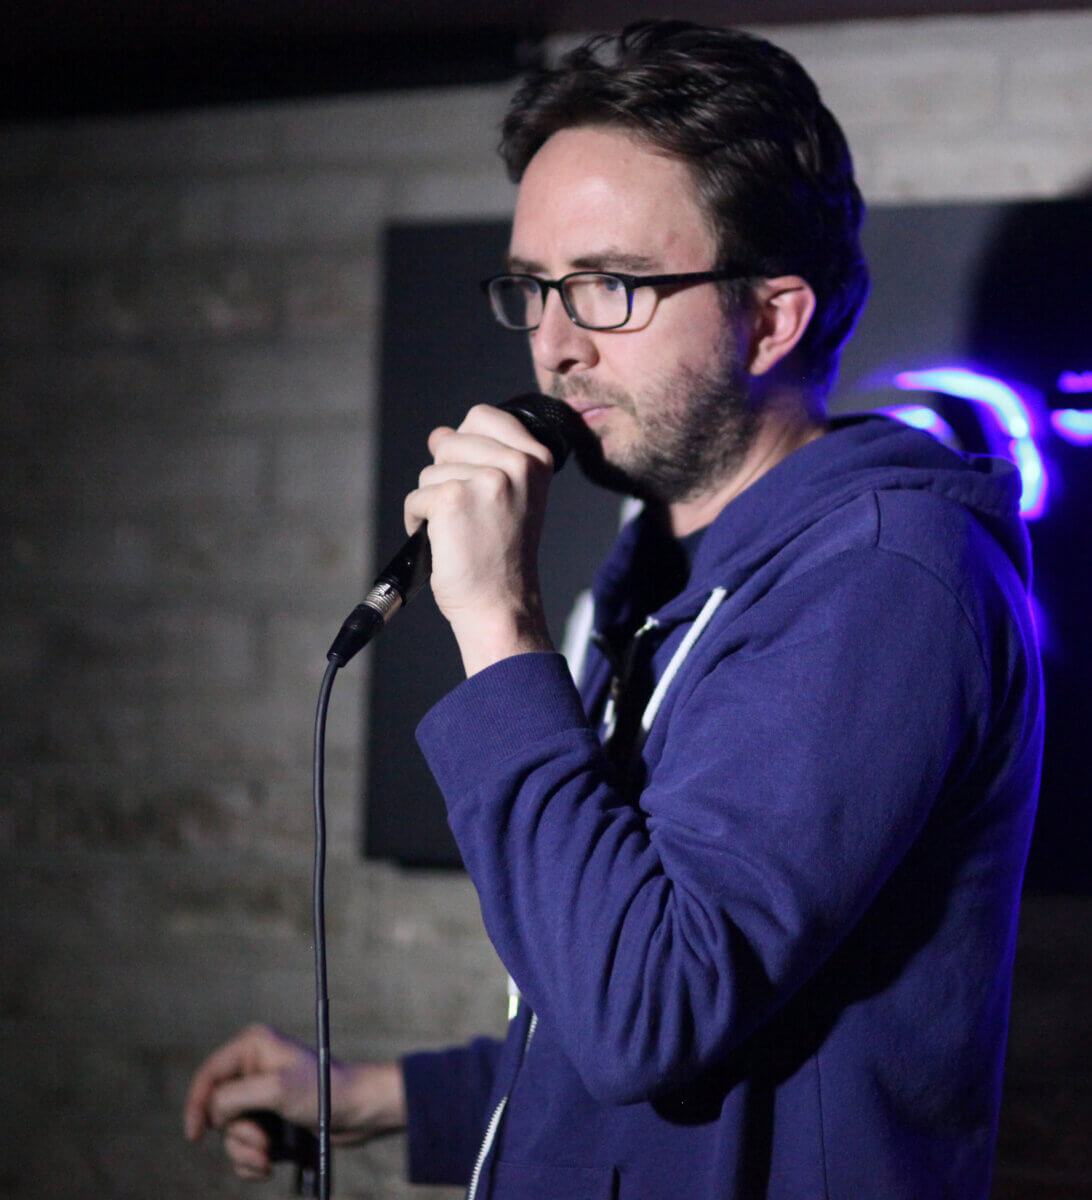 A man in glasses and a blue hoodie performing at a microphone with dim lighting and neon lights in the background.